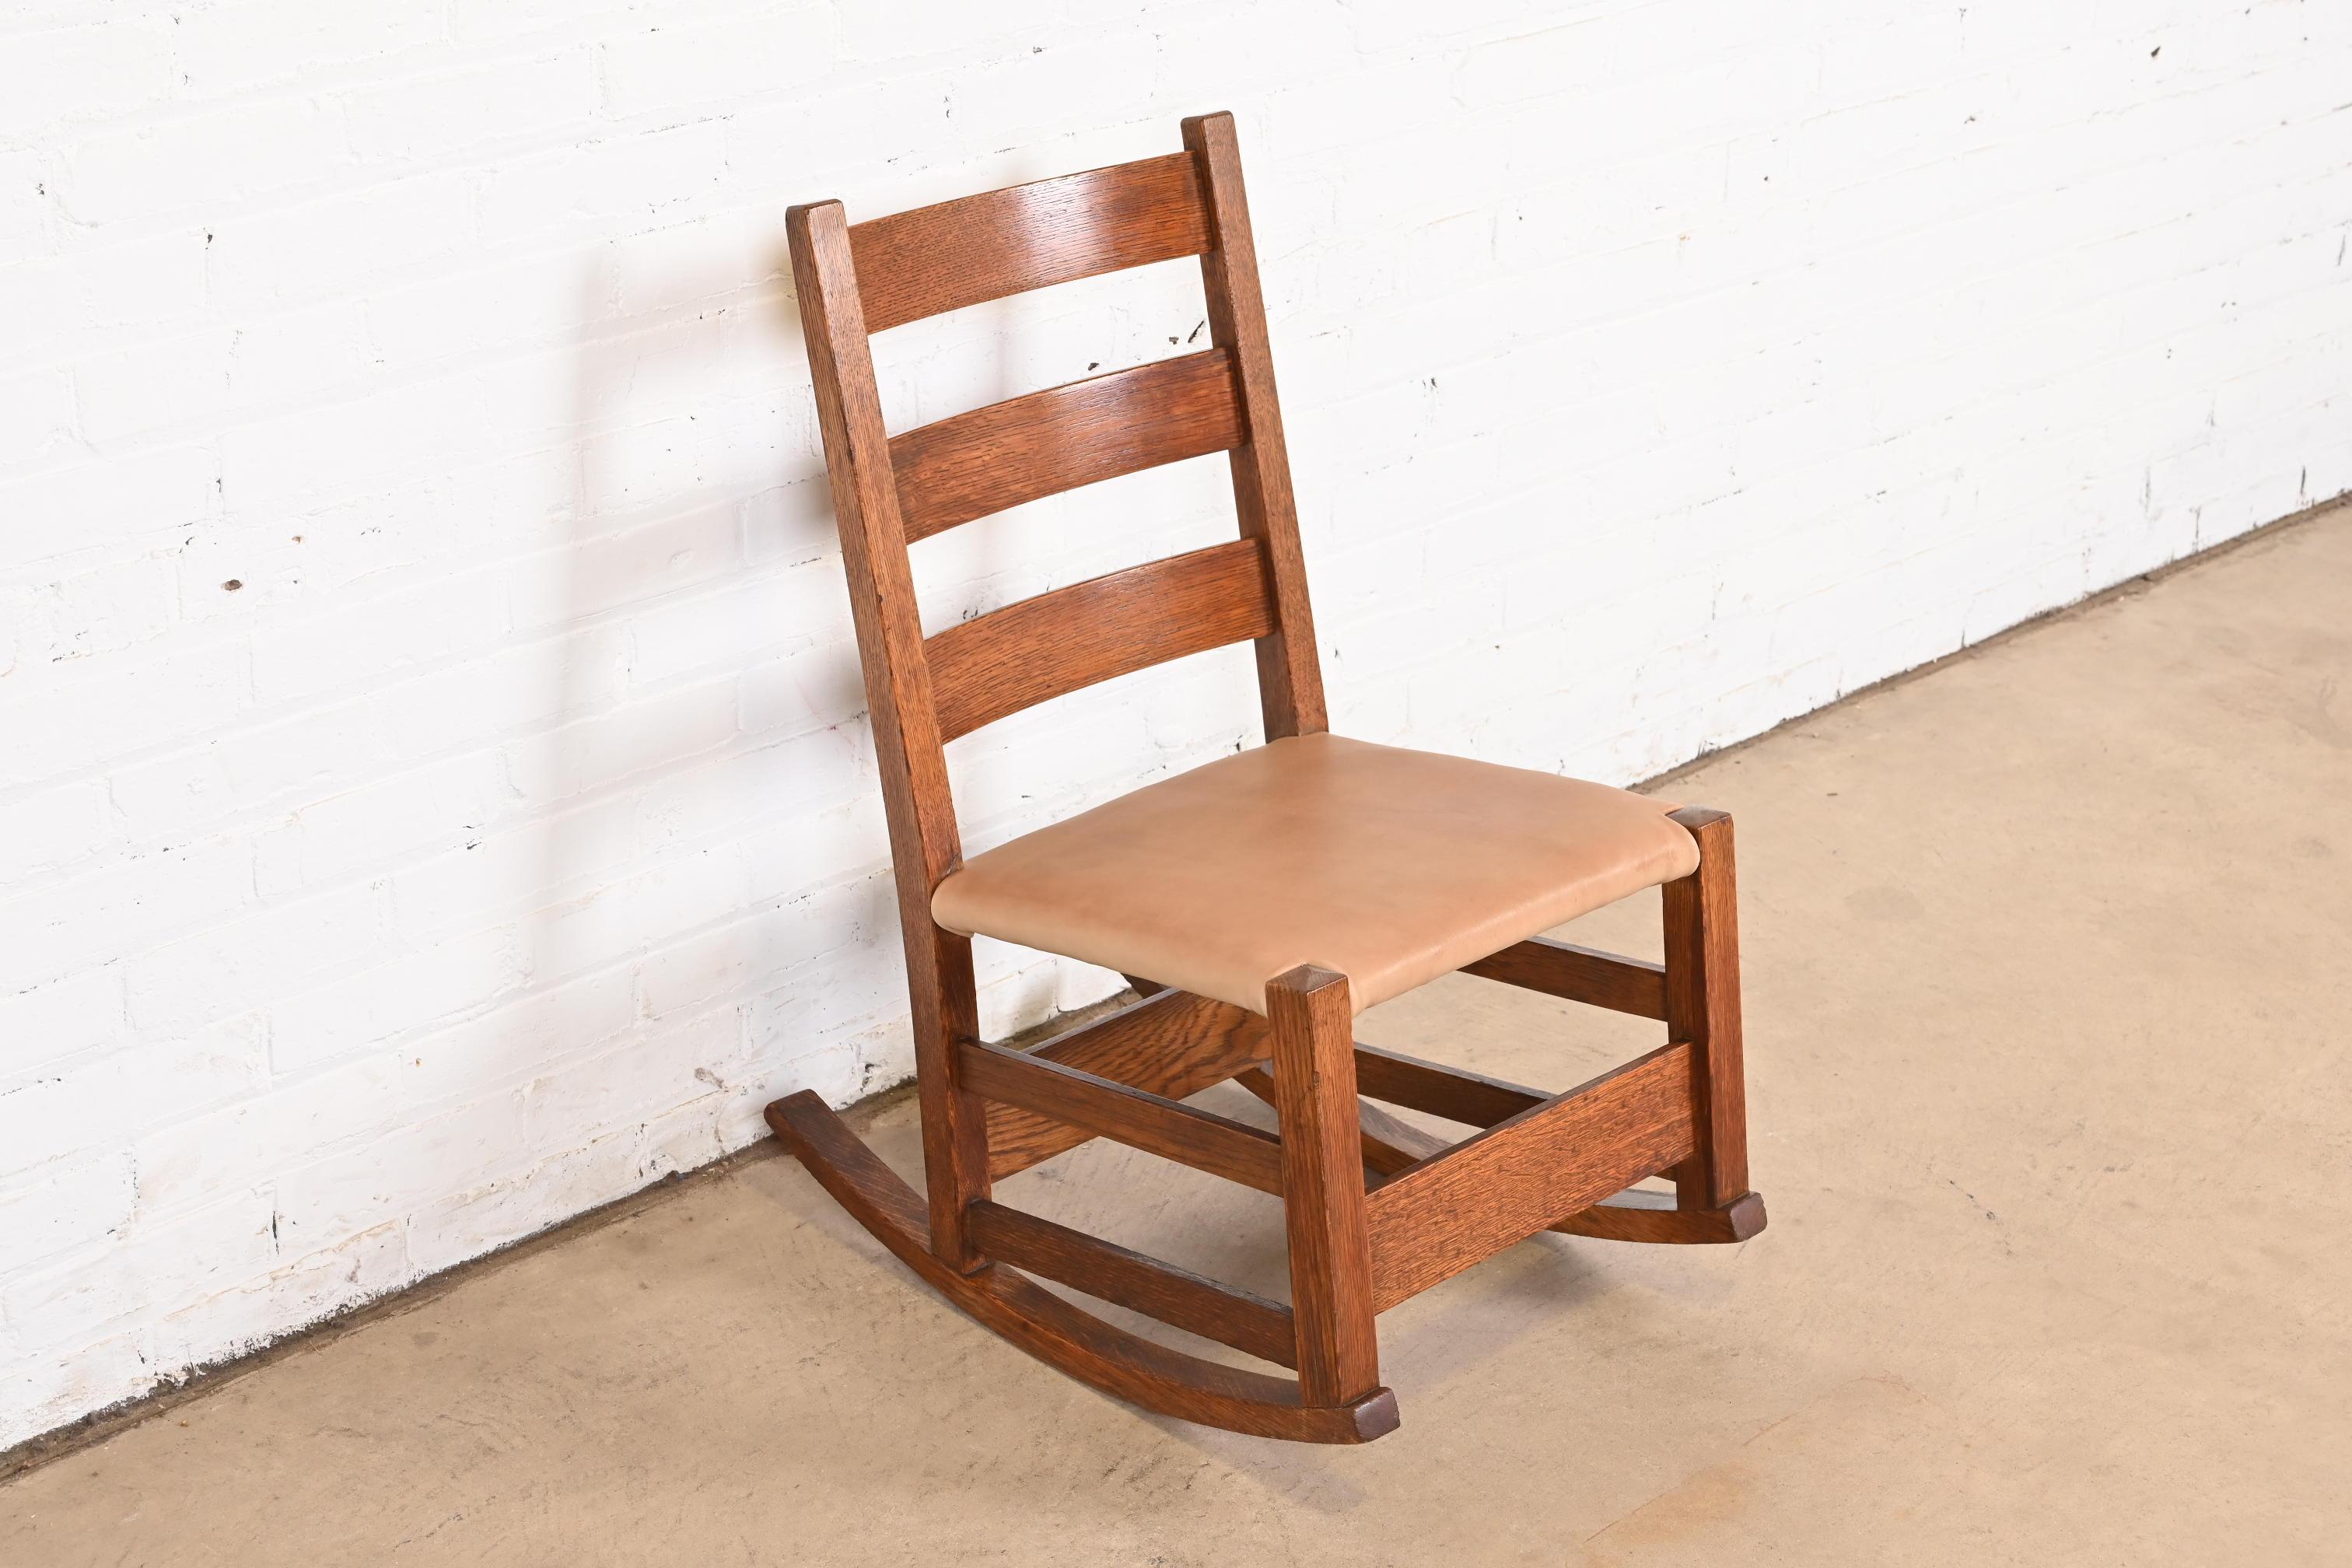 American Gustav Stickley Mission Oak Arts & Crafts Sewing Rocking Chair, Circa 1900 For Sale